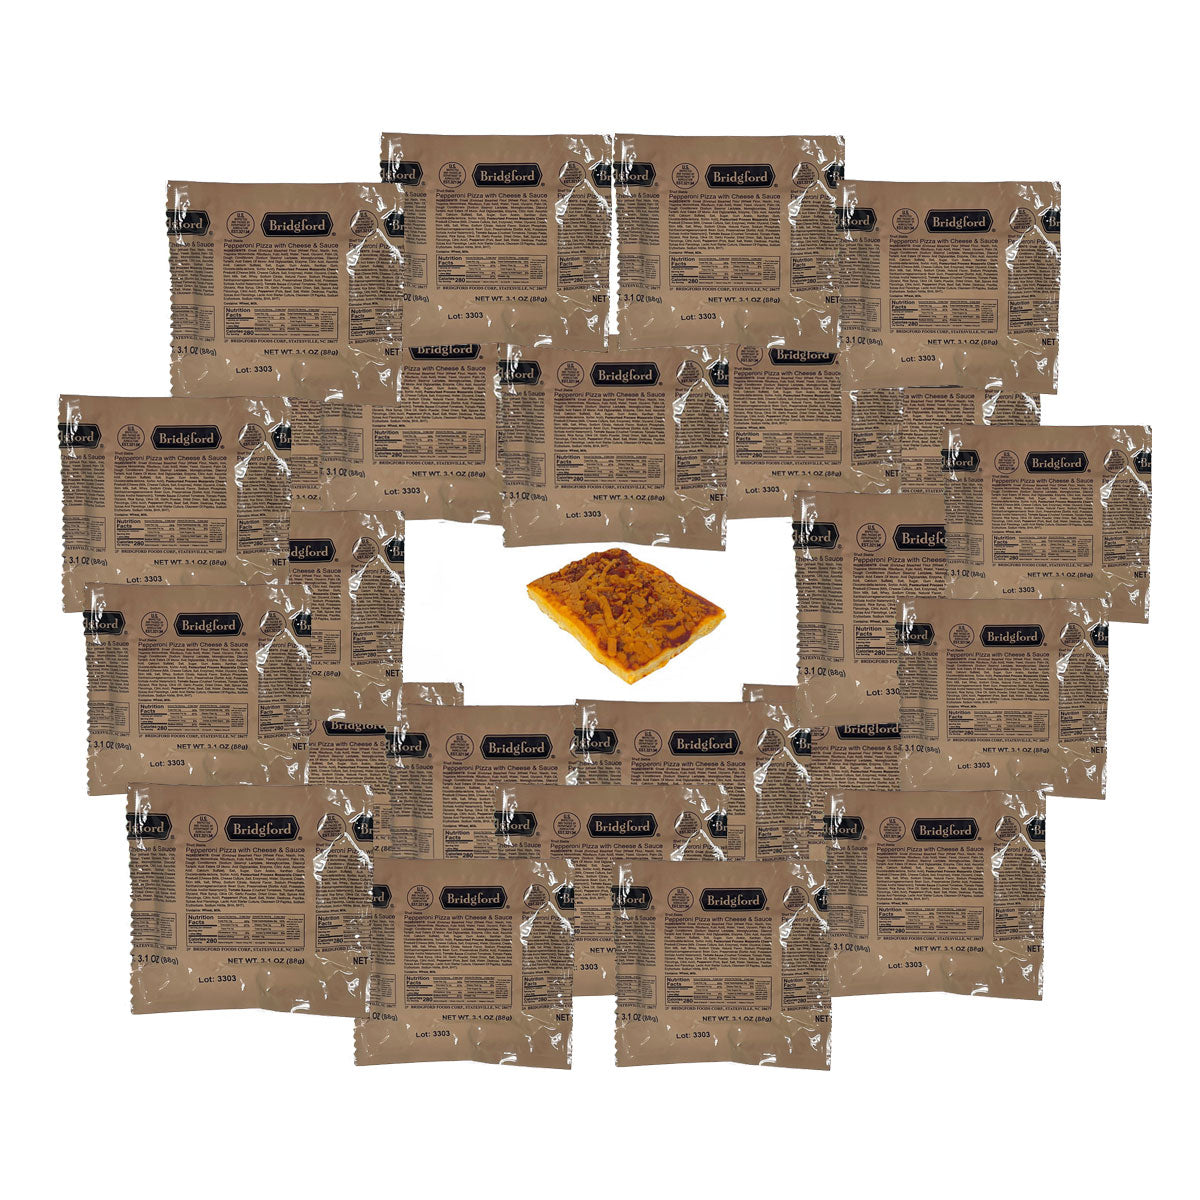 Pepperoni Pizza Slice - MRE Meals Ready to Eat 24 Pack